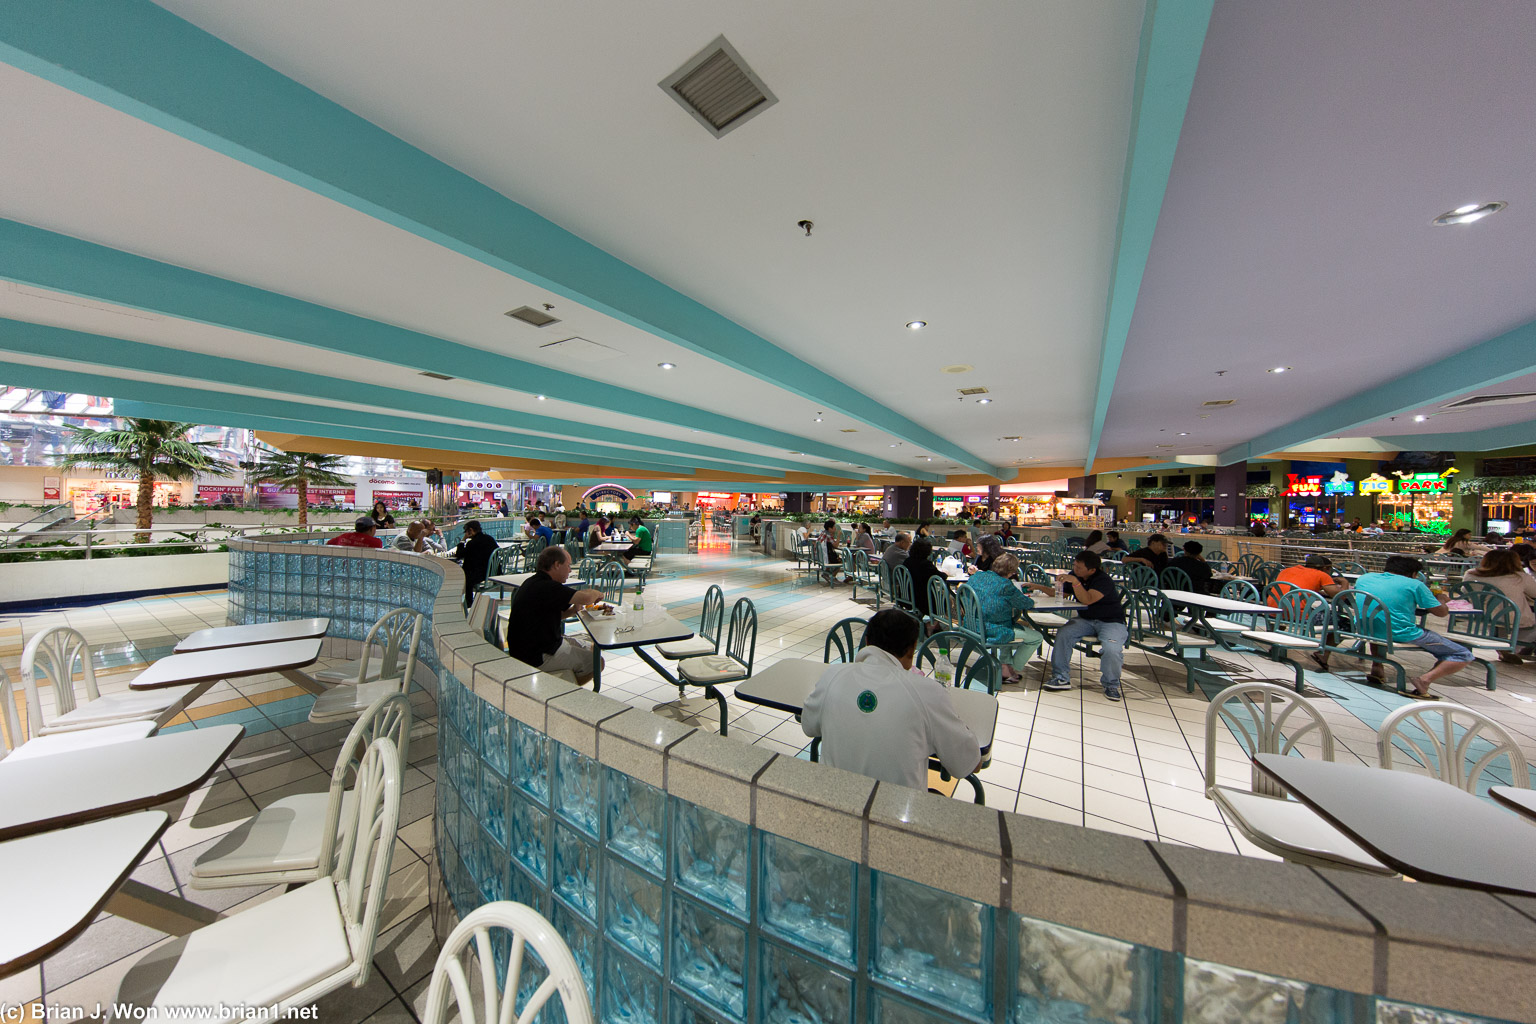 Very ordinary food court, but looks super fancy with an ultrawide.